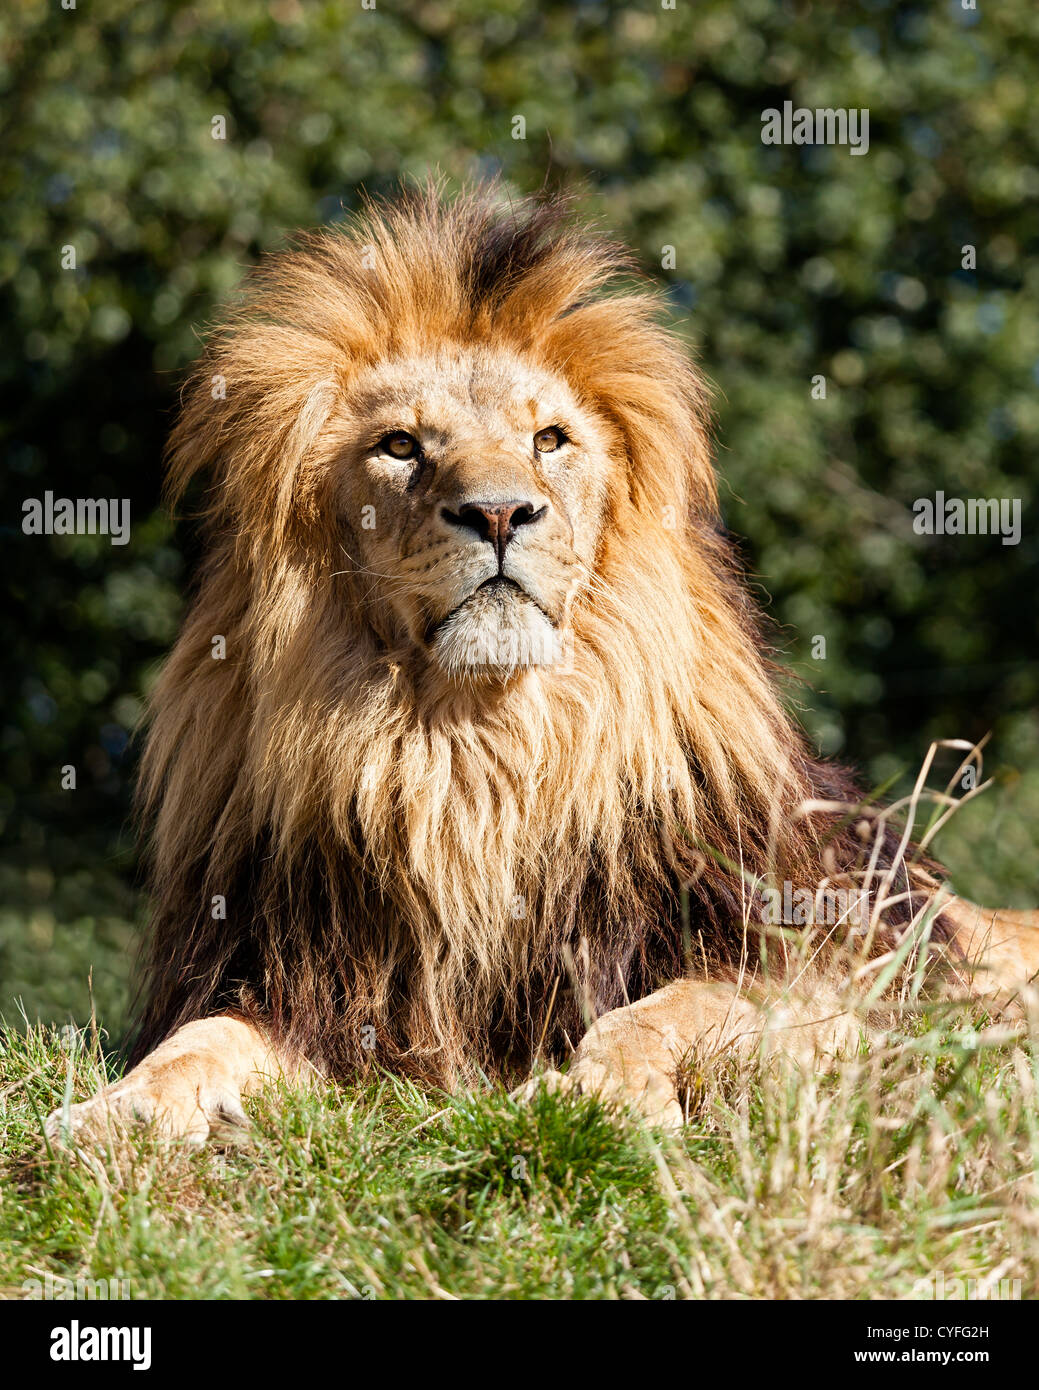 Fier Lion majestueux Sitting in Grass Panthera leo Banque D'Images